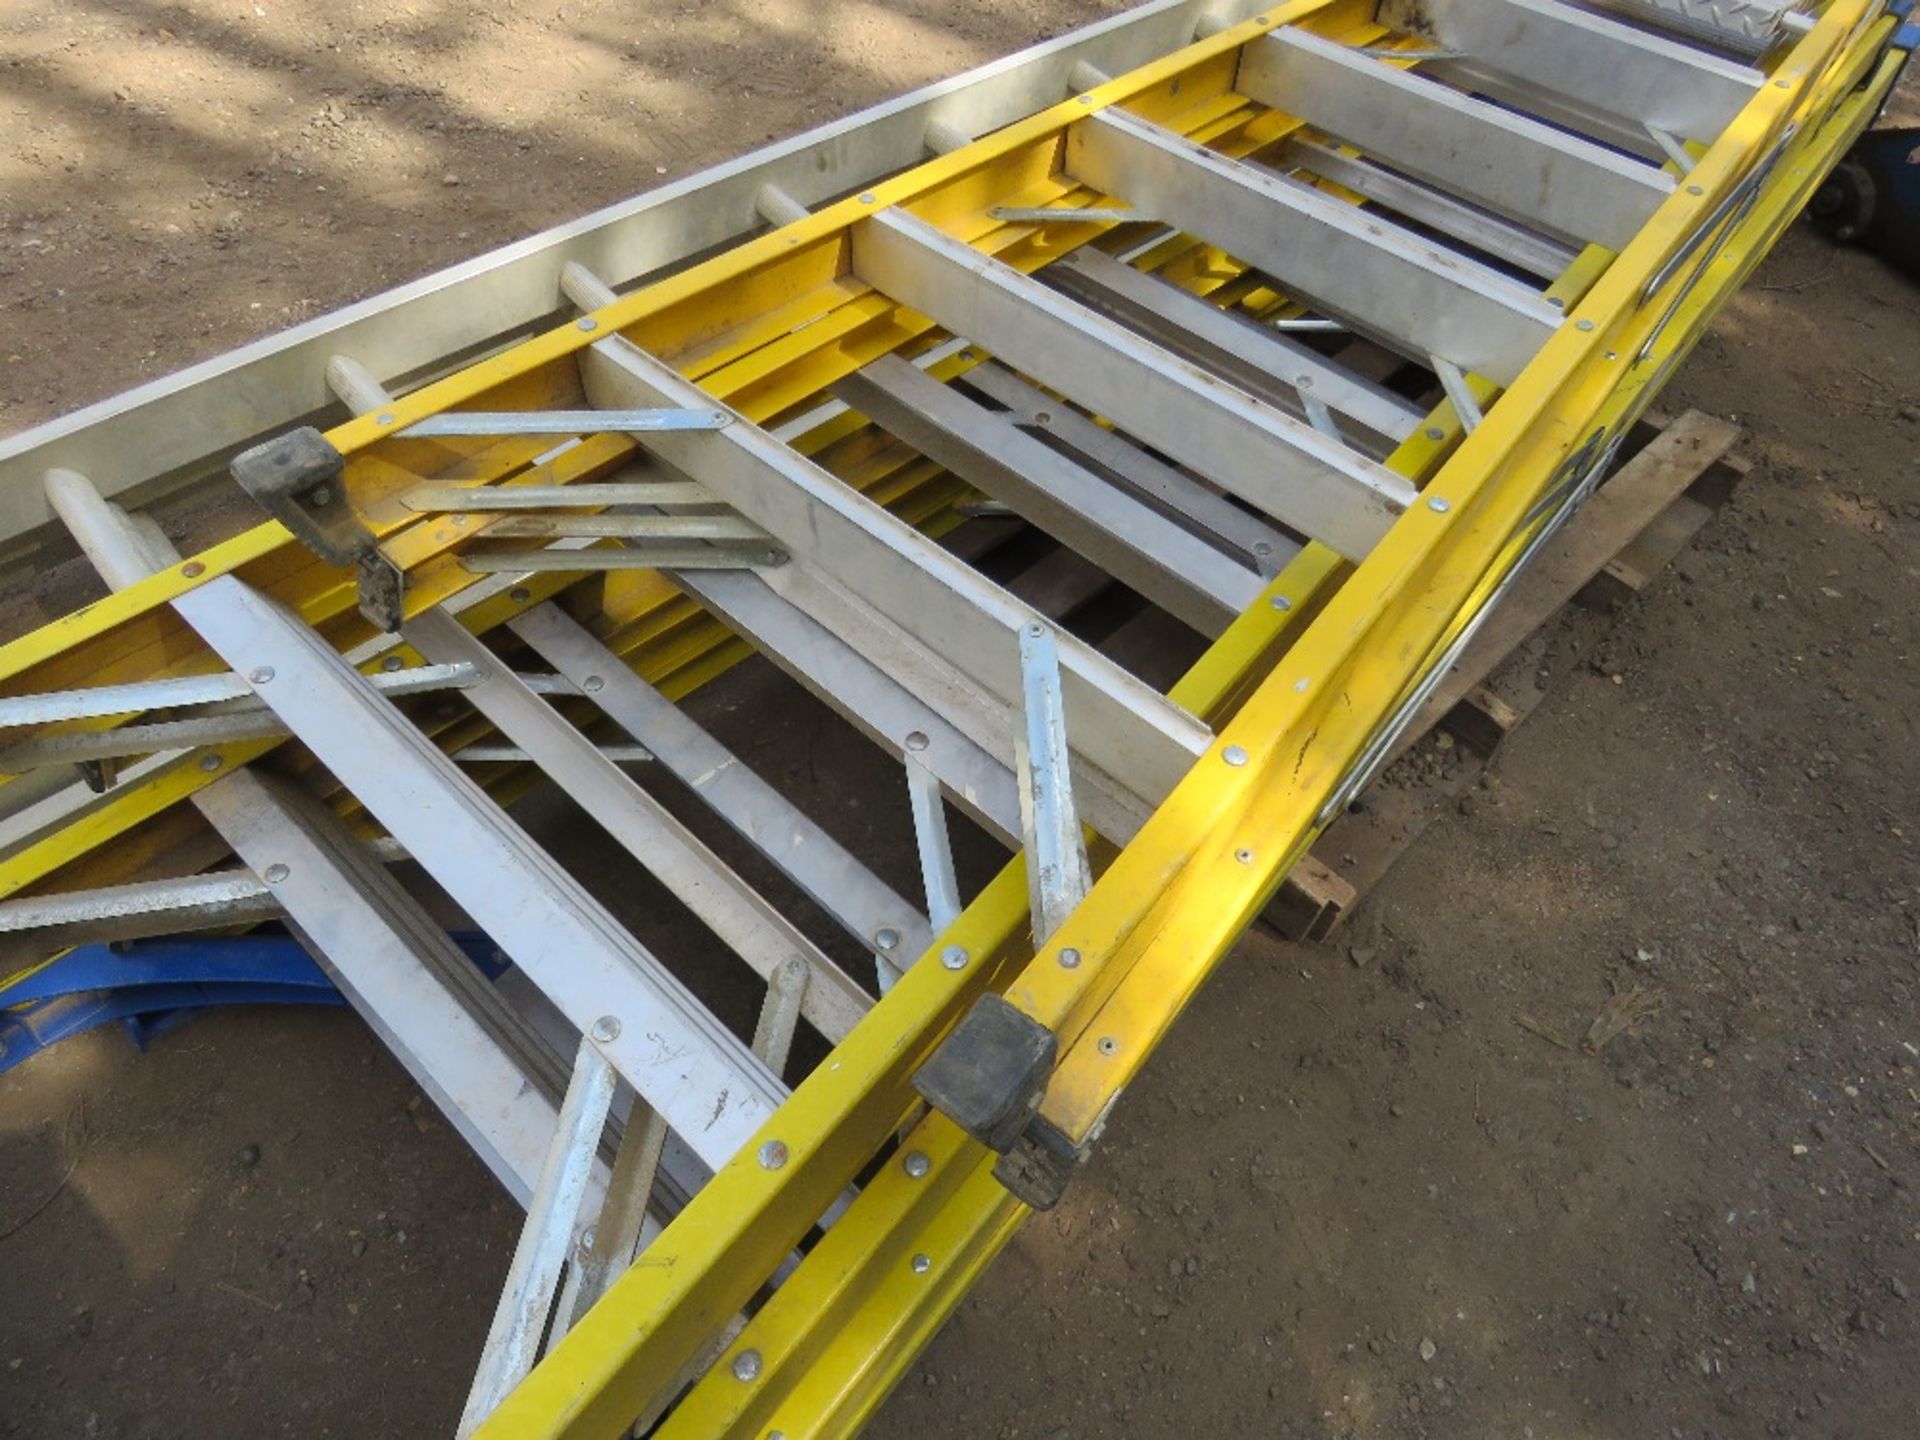 4 X GRP STEP LADDERS. - Image 3 of 3